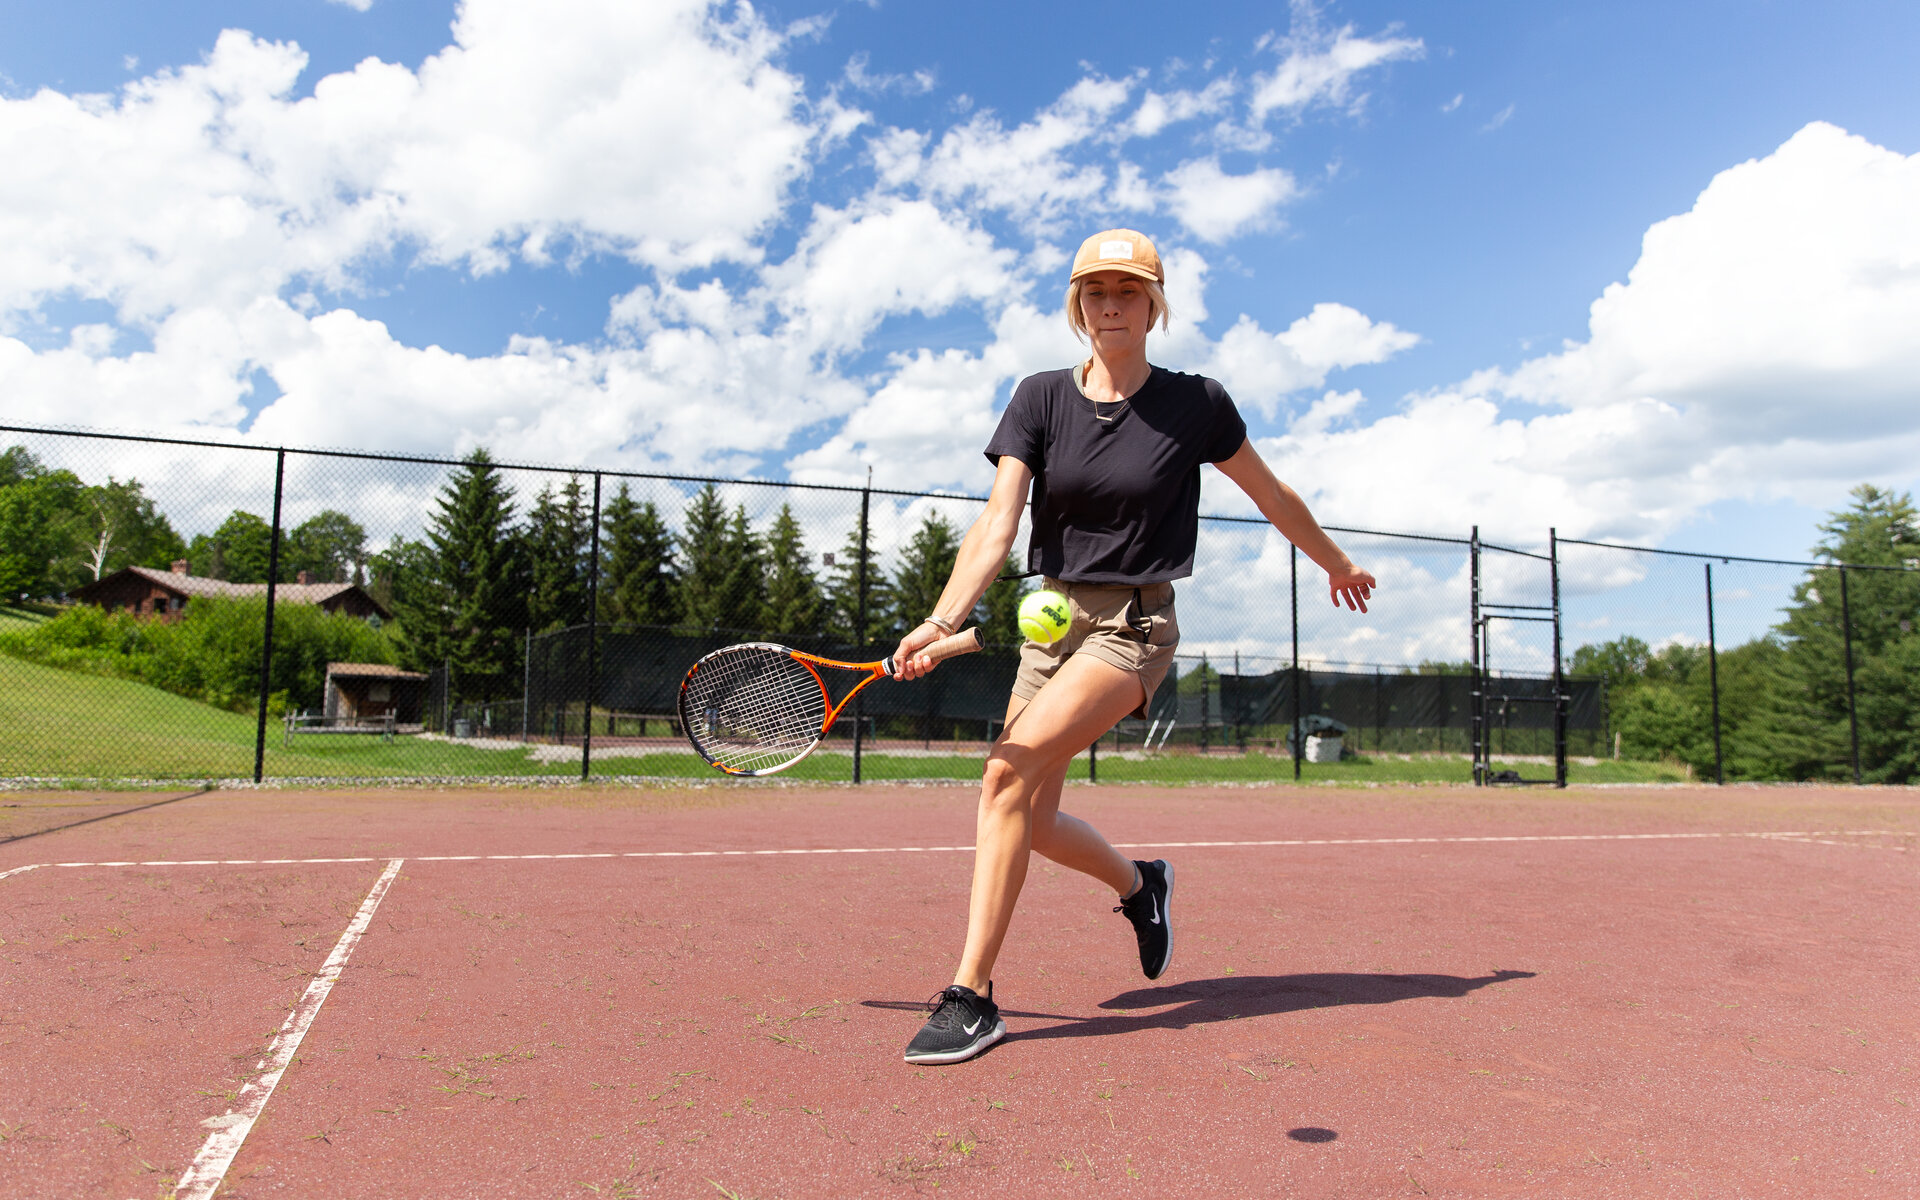 person playing tennis